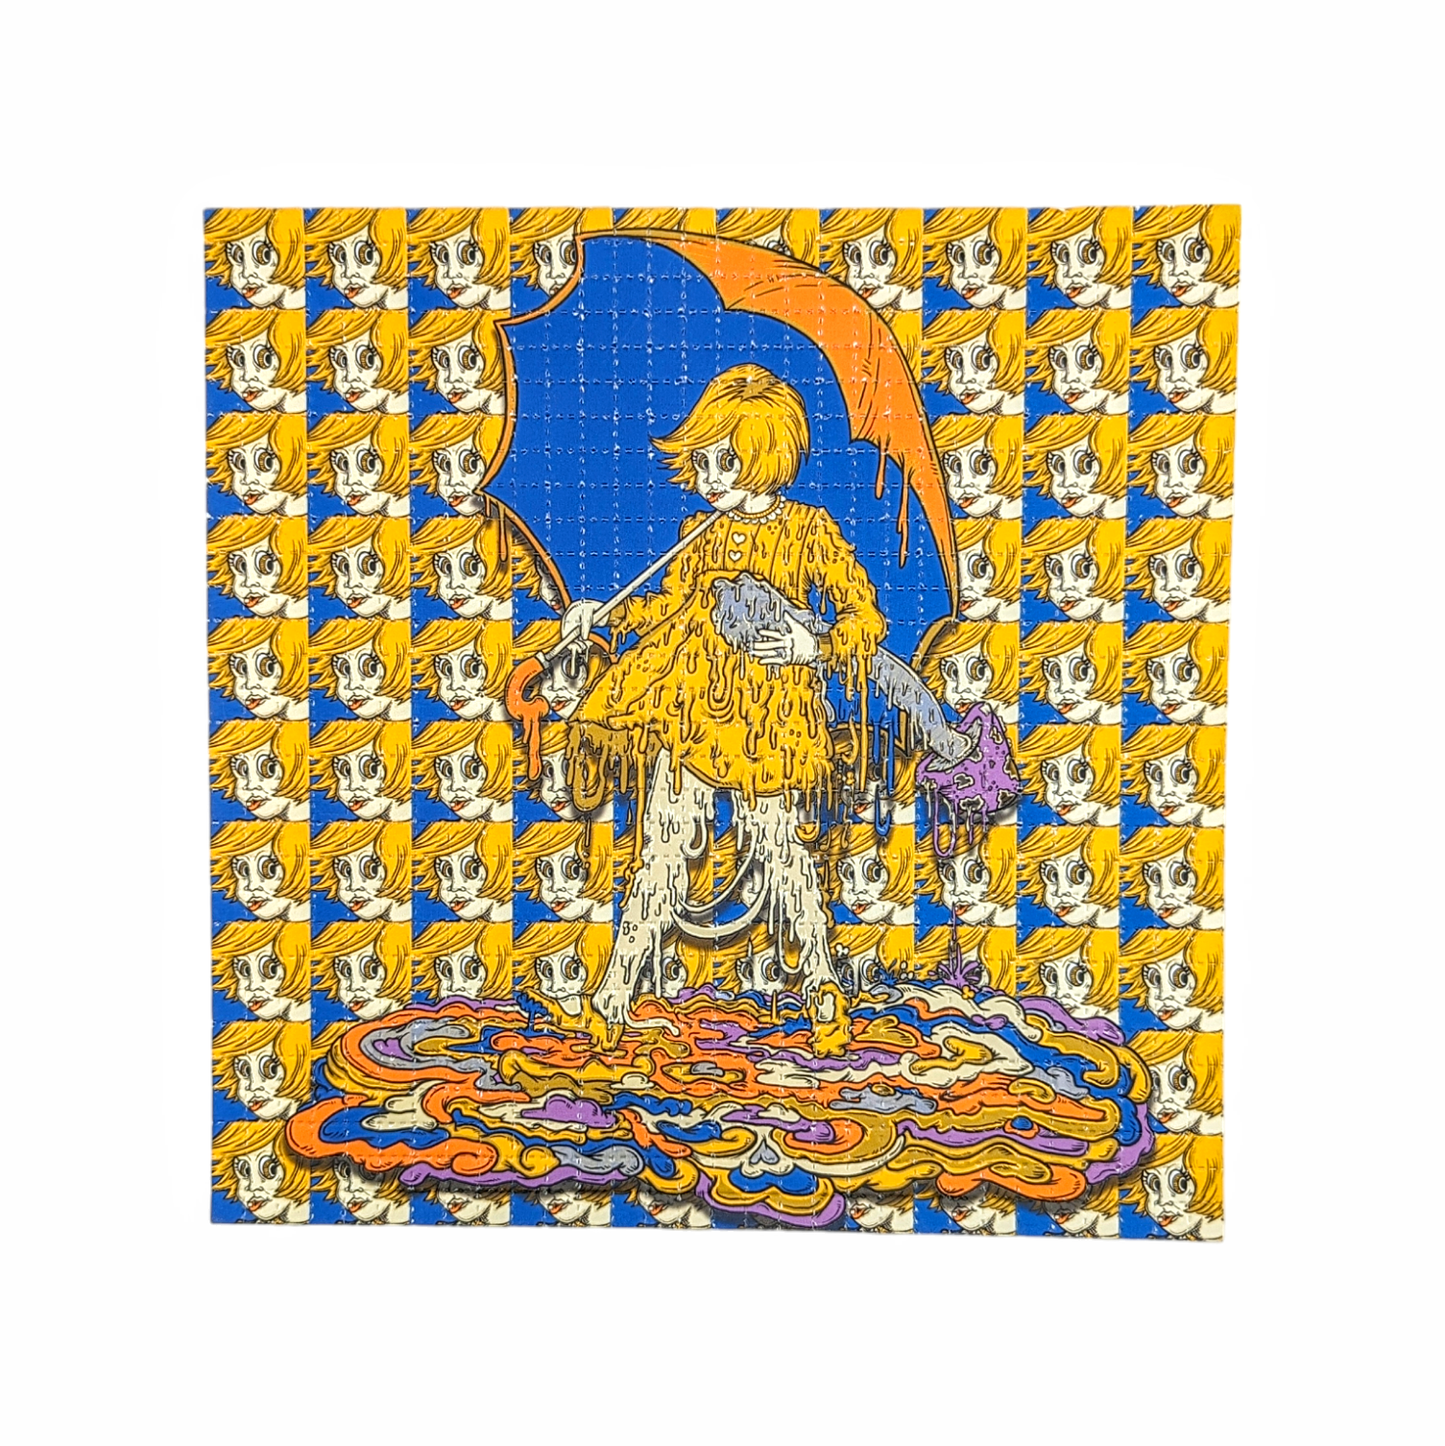 Vincent Gordon  Melty Mushroom Girl, 2024 Archival Pigment Print on Perforated Blotter Paper 7.75 x 7.75 in Edition of 200  Hand Signed + Numbered by Vincent Gordon. Hand perforated by Zane Kesey.